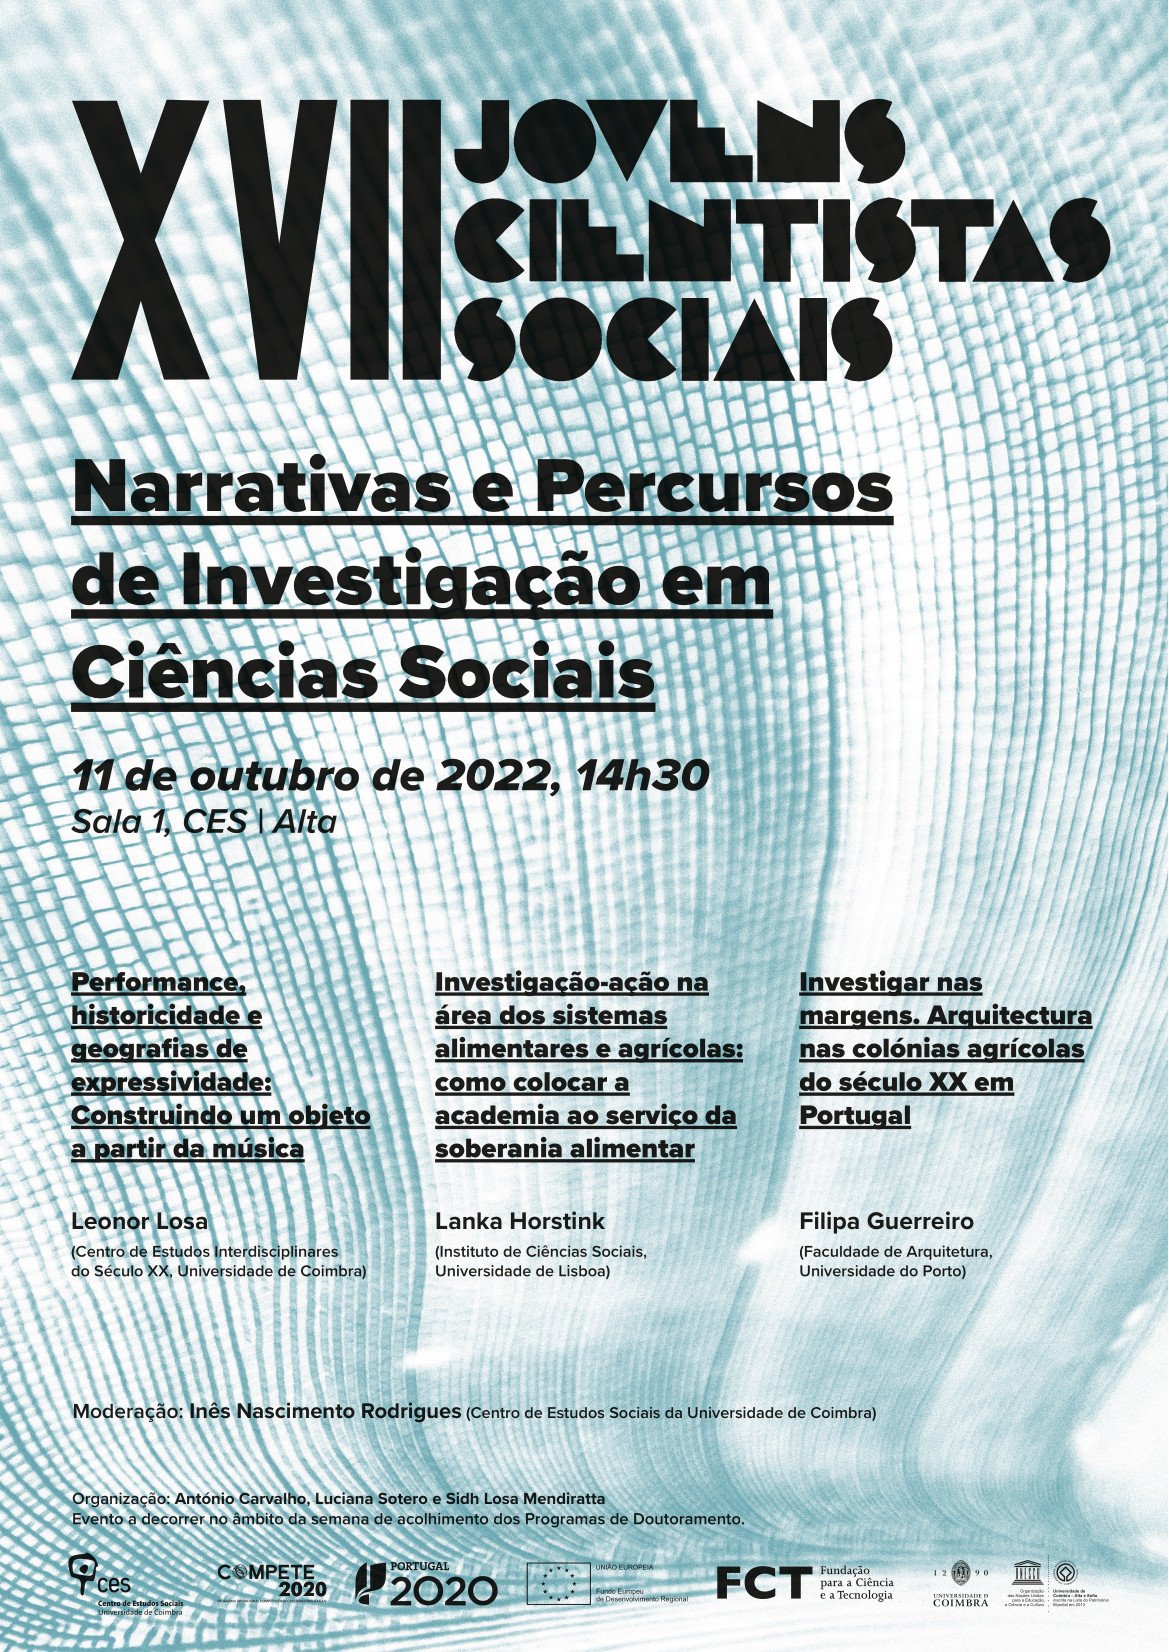 Research Paths and Narratives in Social Sciences <span id="edit_40603"><script>$(function() { $('#edit_40603').load( "/myces/user/editobj.php?tipo=evento&id=40603" ); });</script></span>